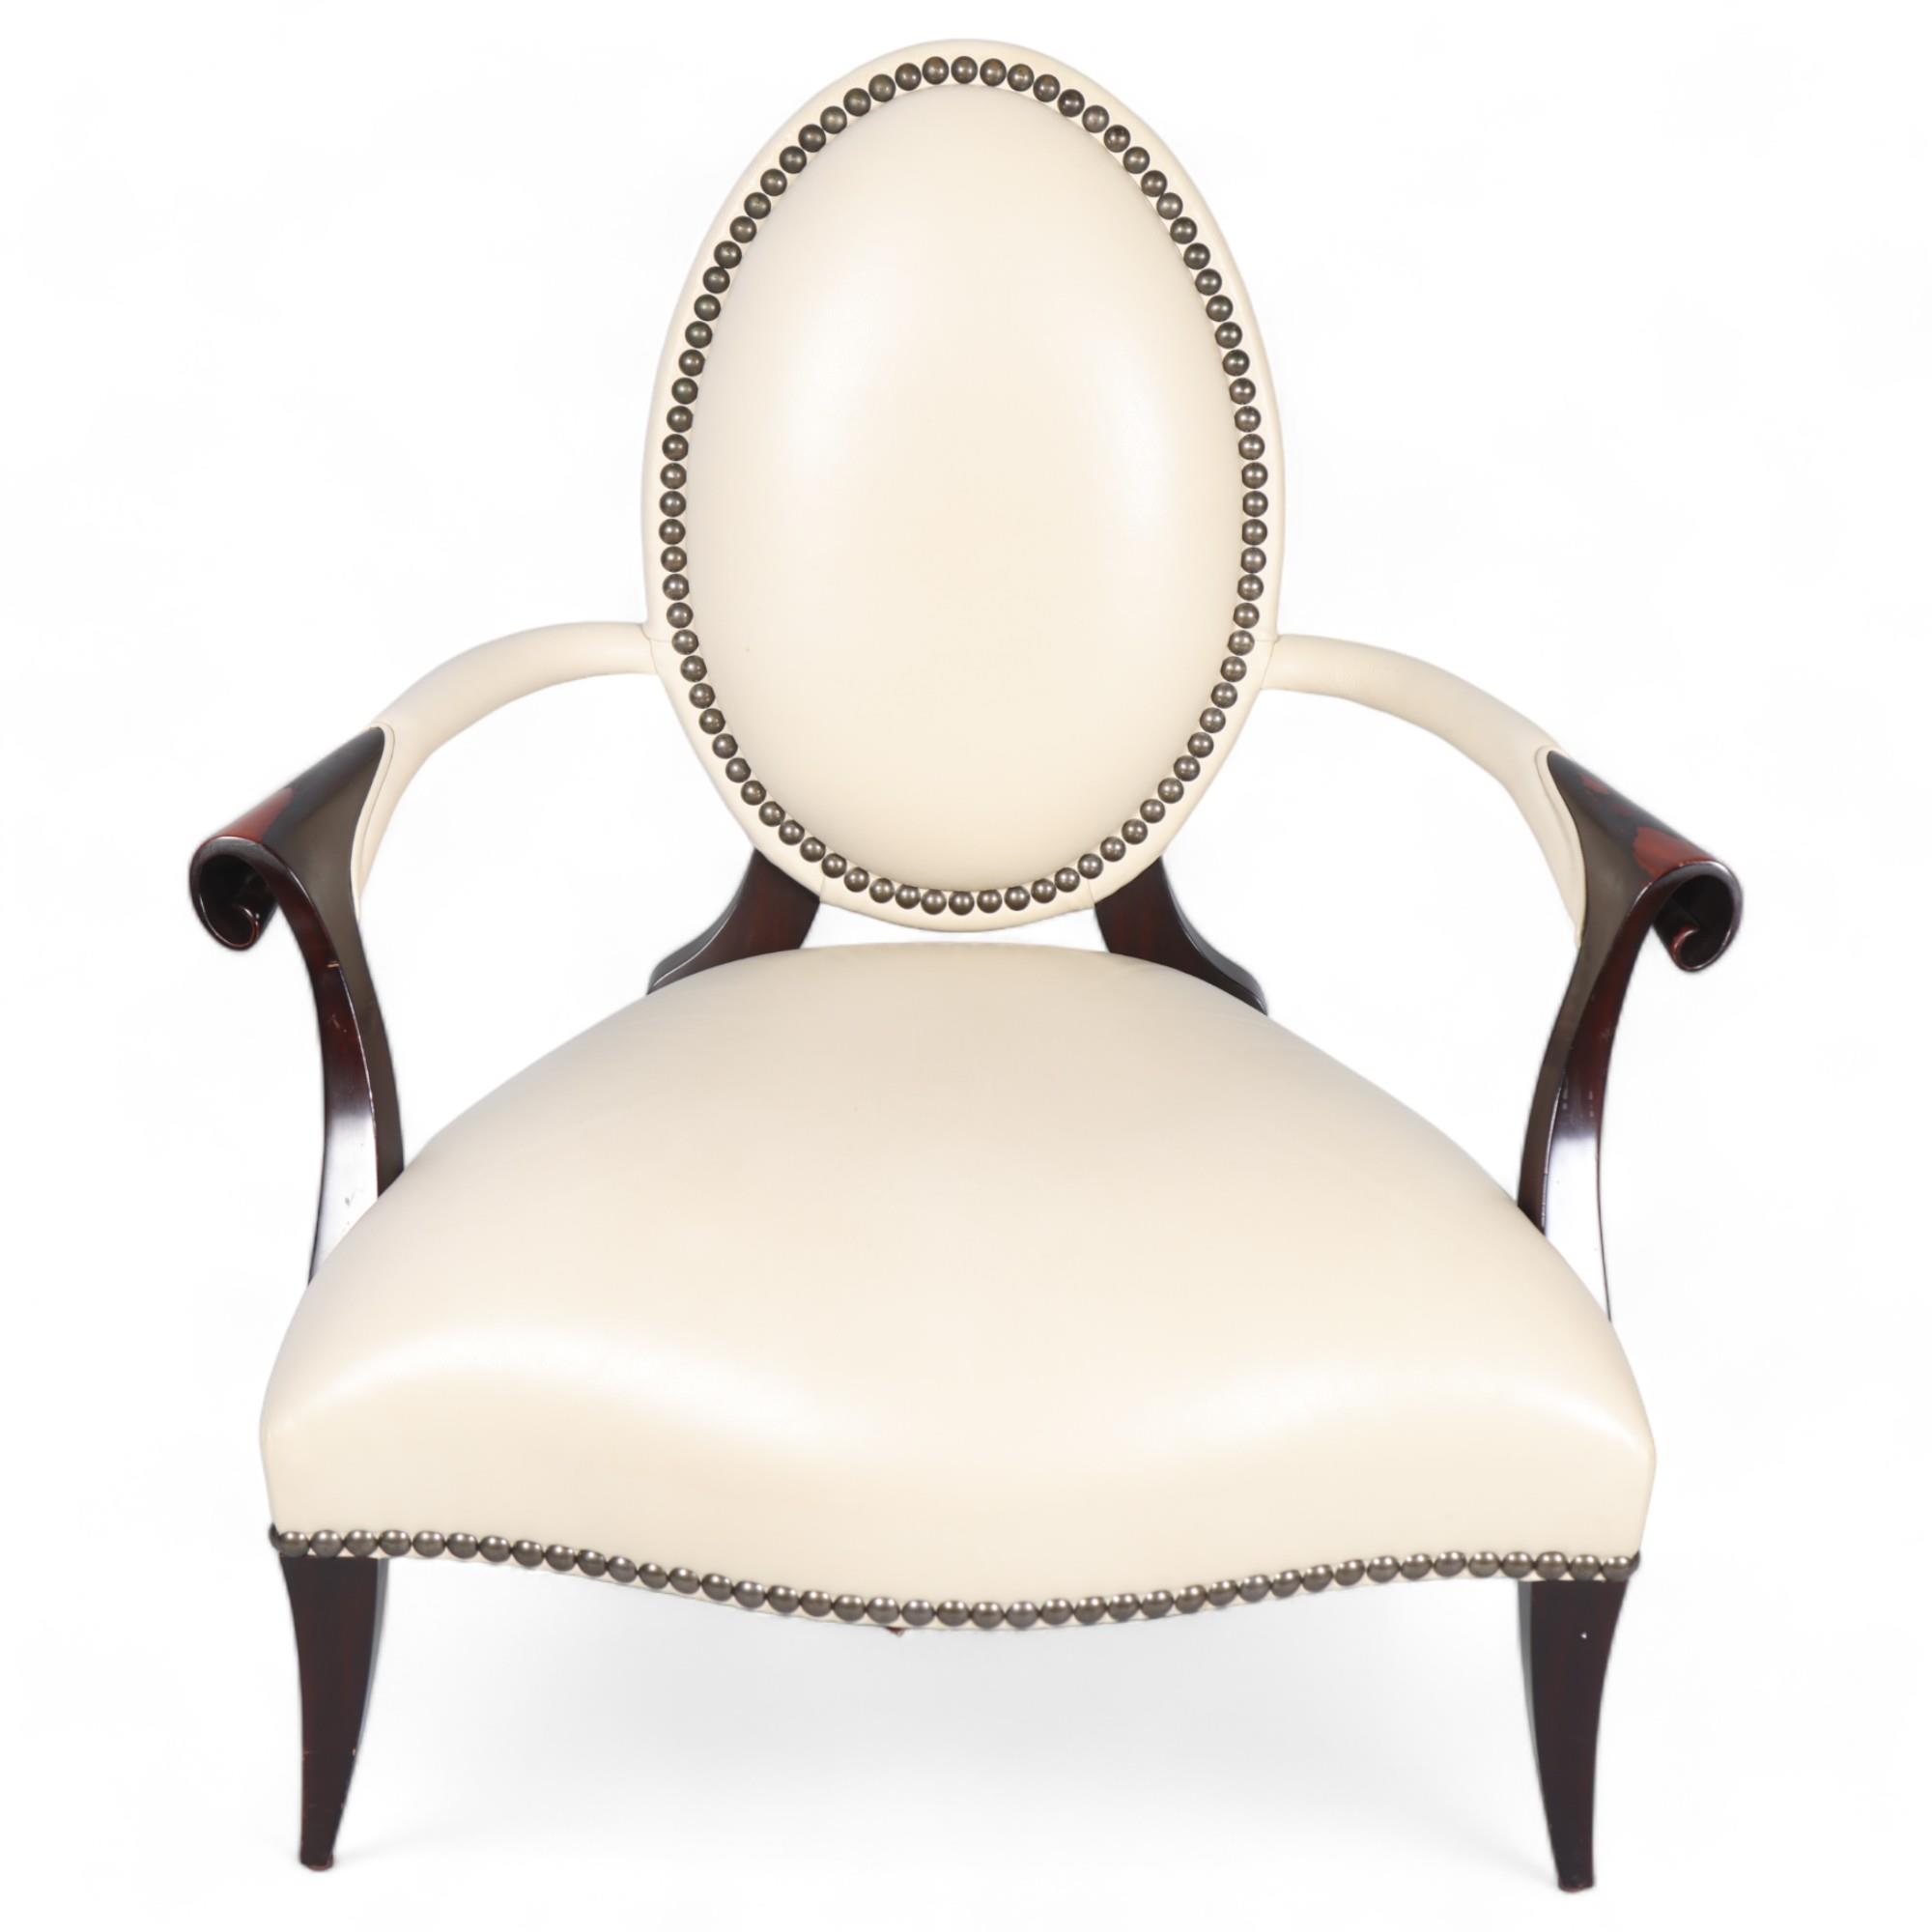 A Christopher Guy salon chair, white studded leather upholstery with silk-cut back to reveal red